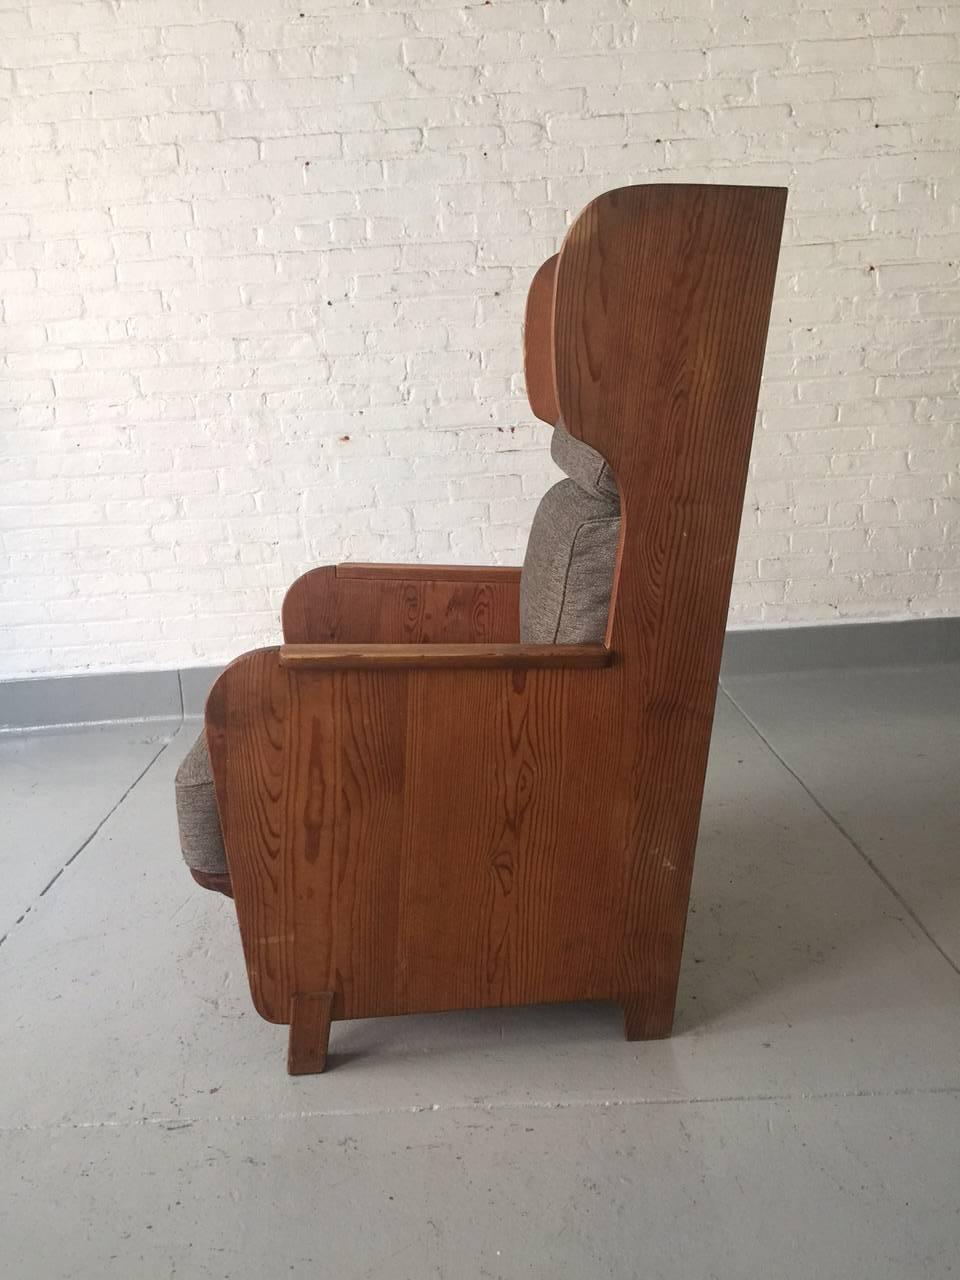 High back lounge chair by Axel Einar Hjorth for Nordiska Kompaniet, circa 1932.
Newly upholstered as originally designed.
Solid pine.
Measures: 43